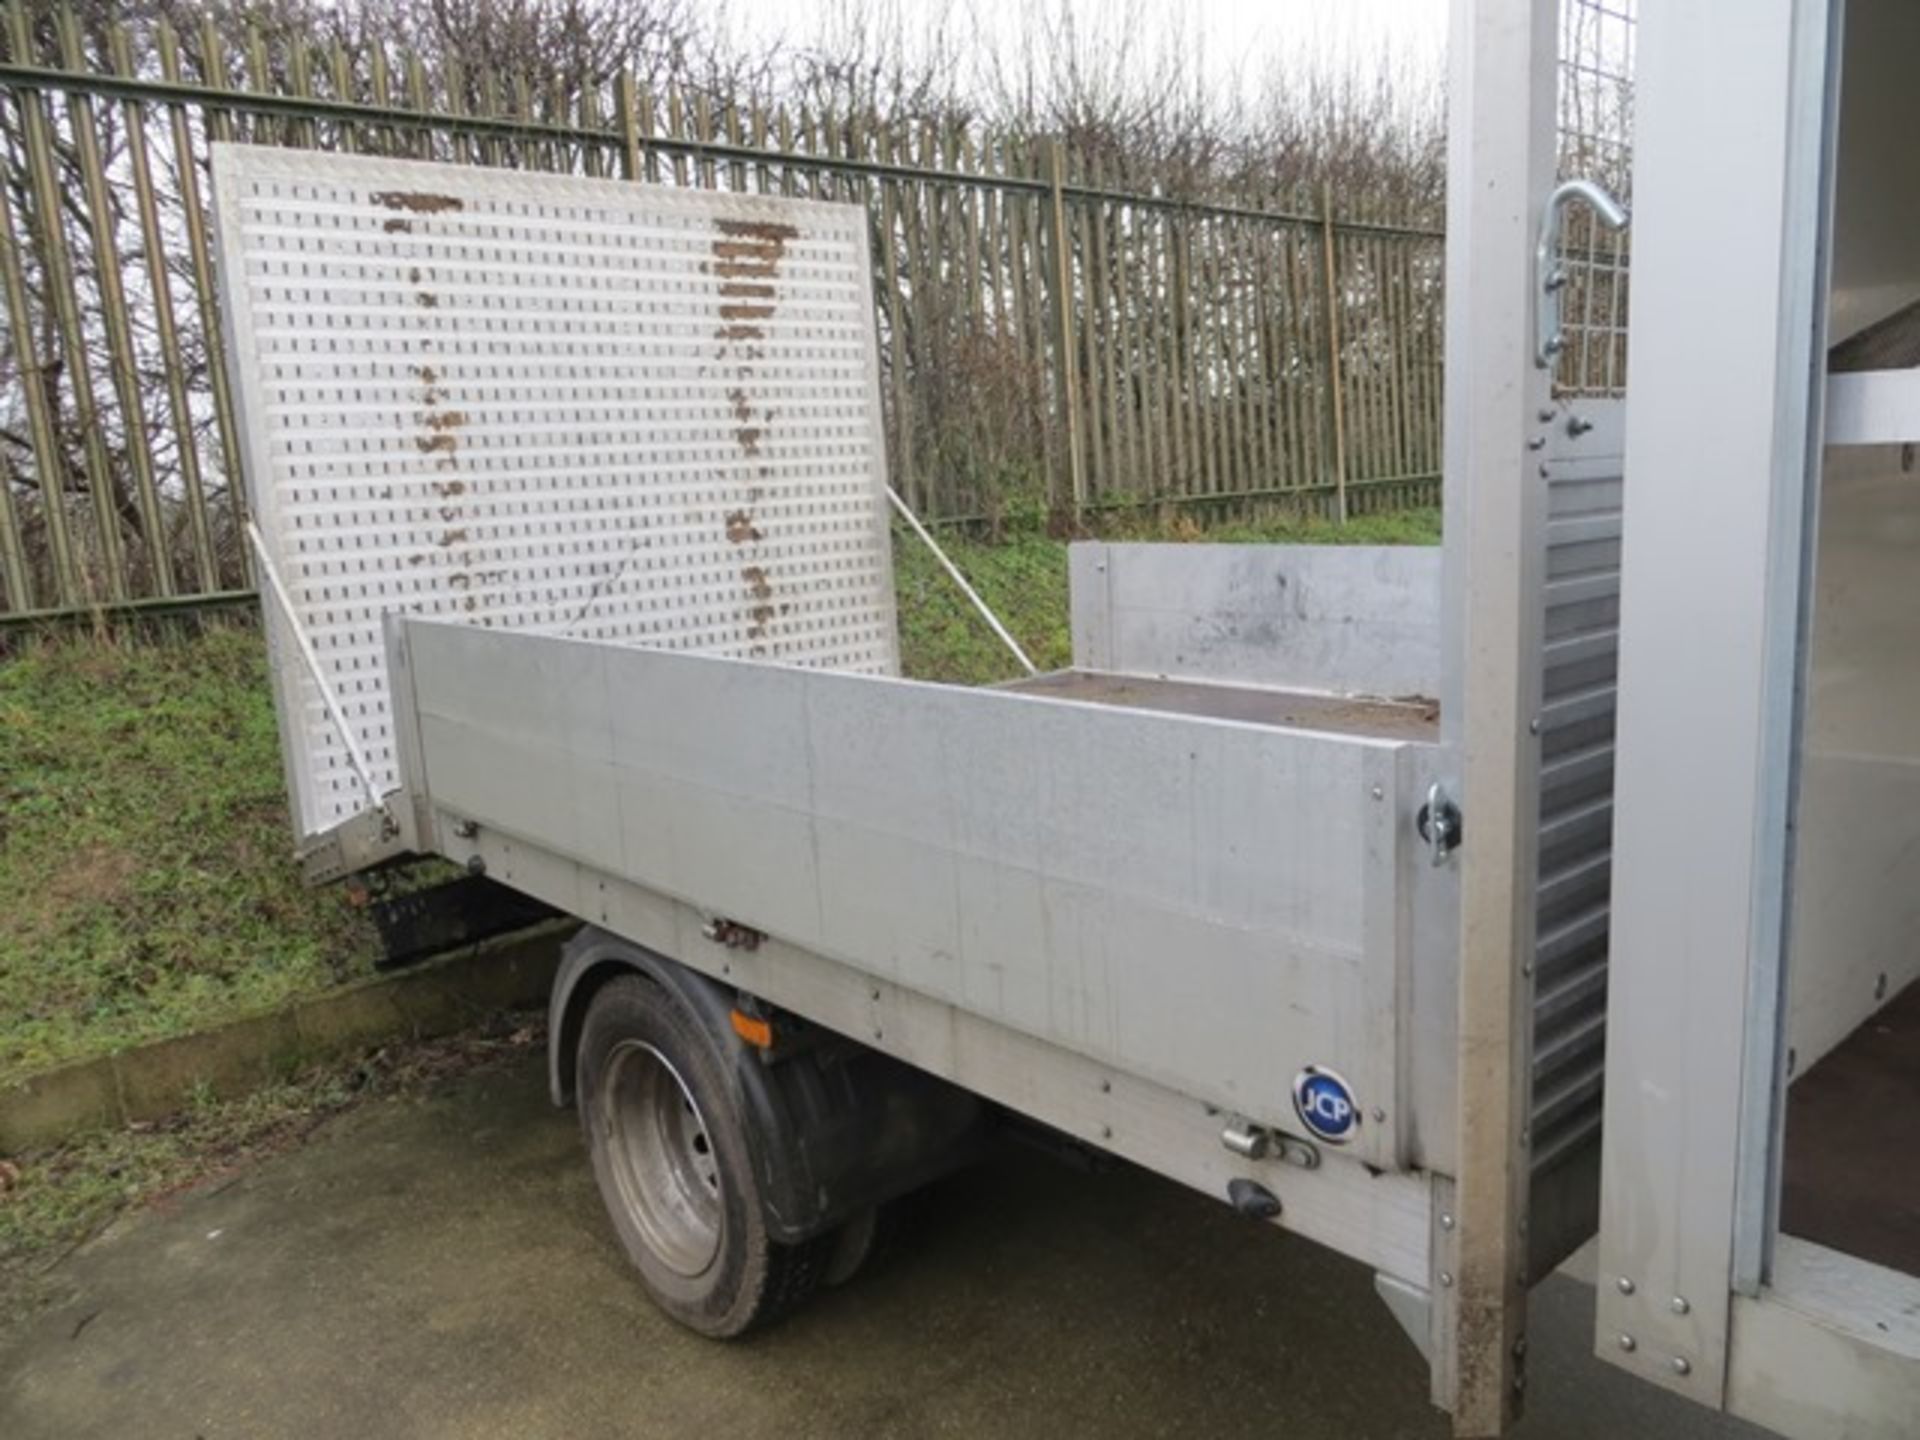 Ford Transit 350 L3 RWD diesel drop side twin wheel lorry with beaver tail. Registration Number SN17 - Image 5 of 10